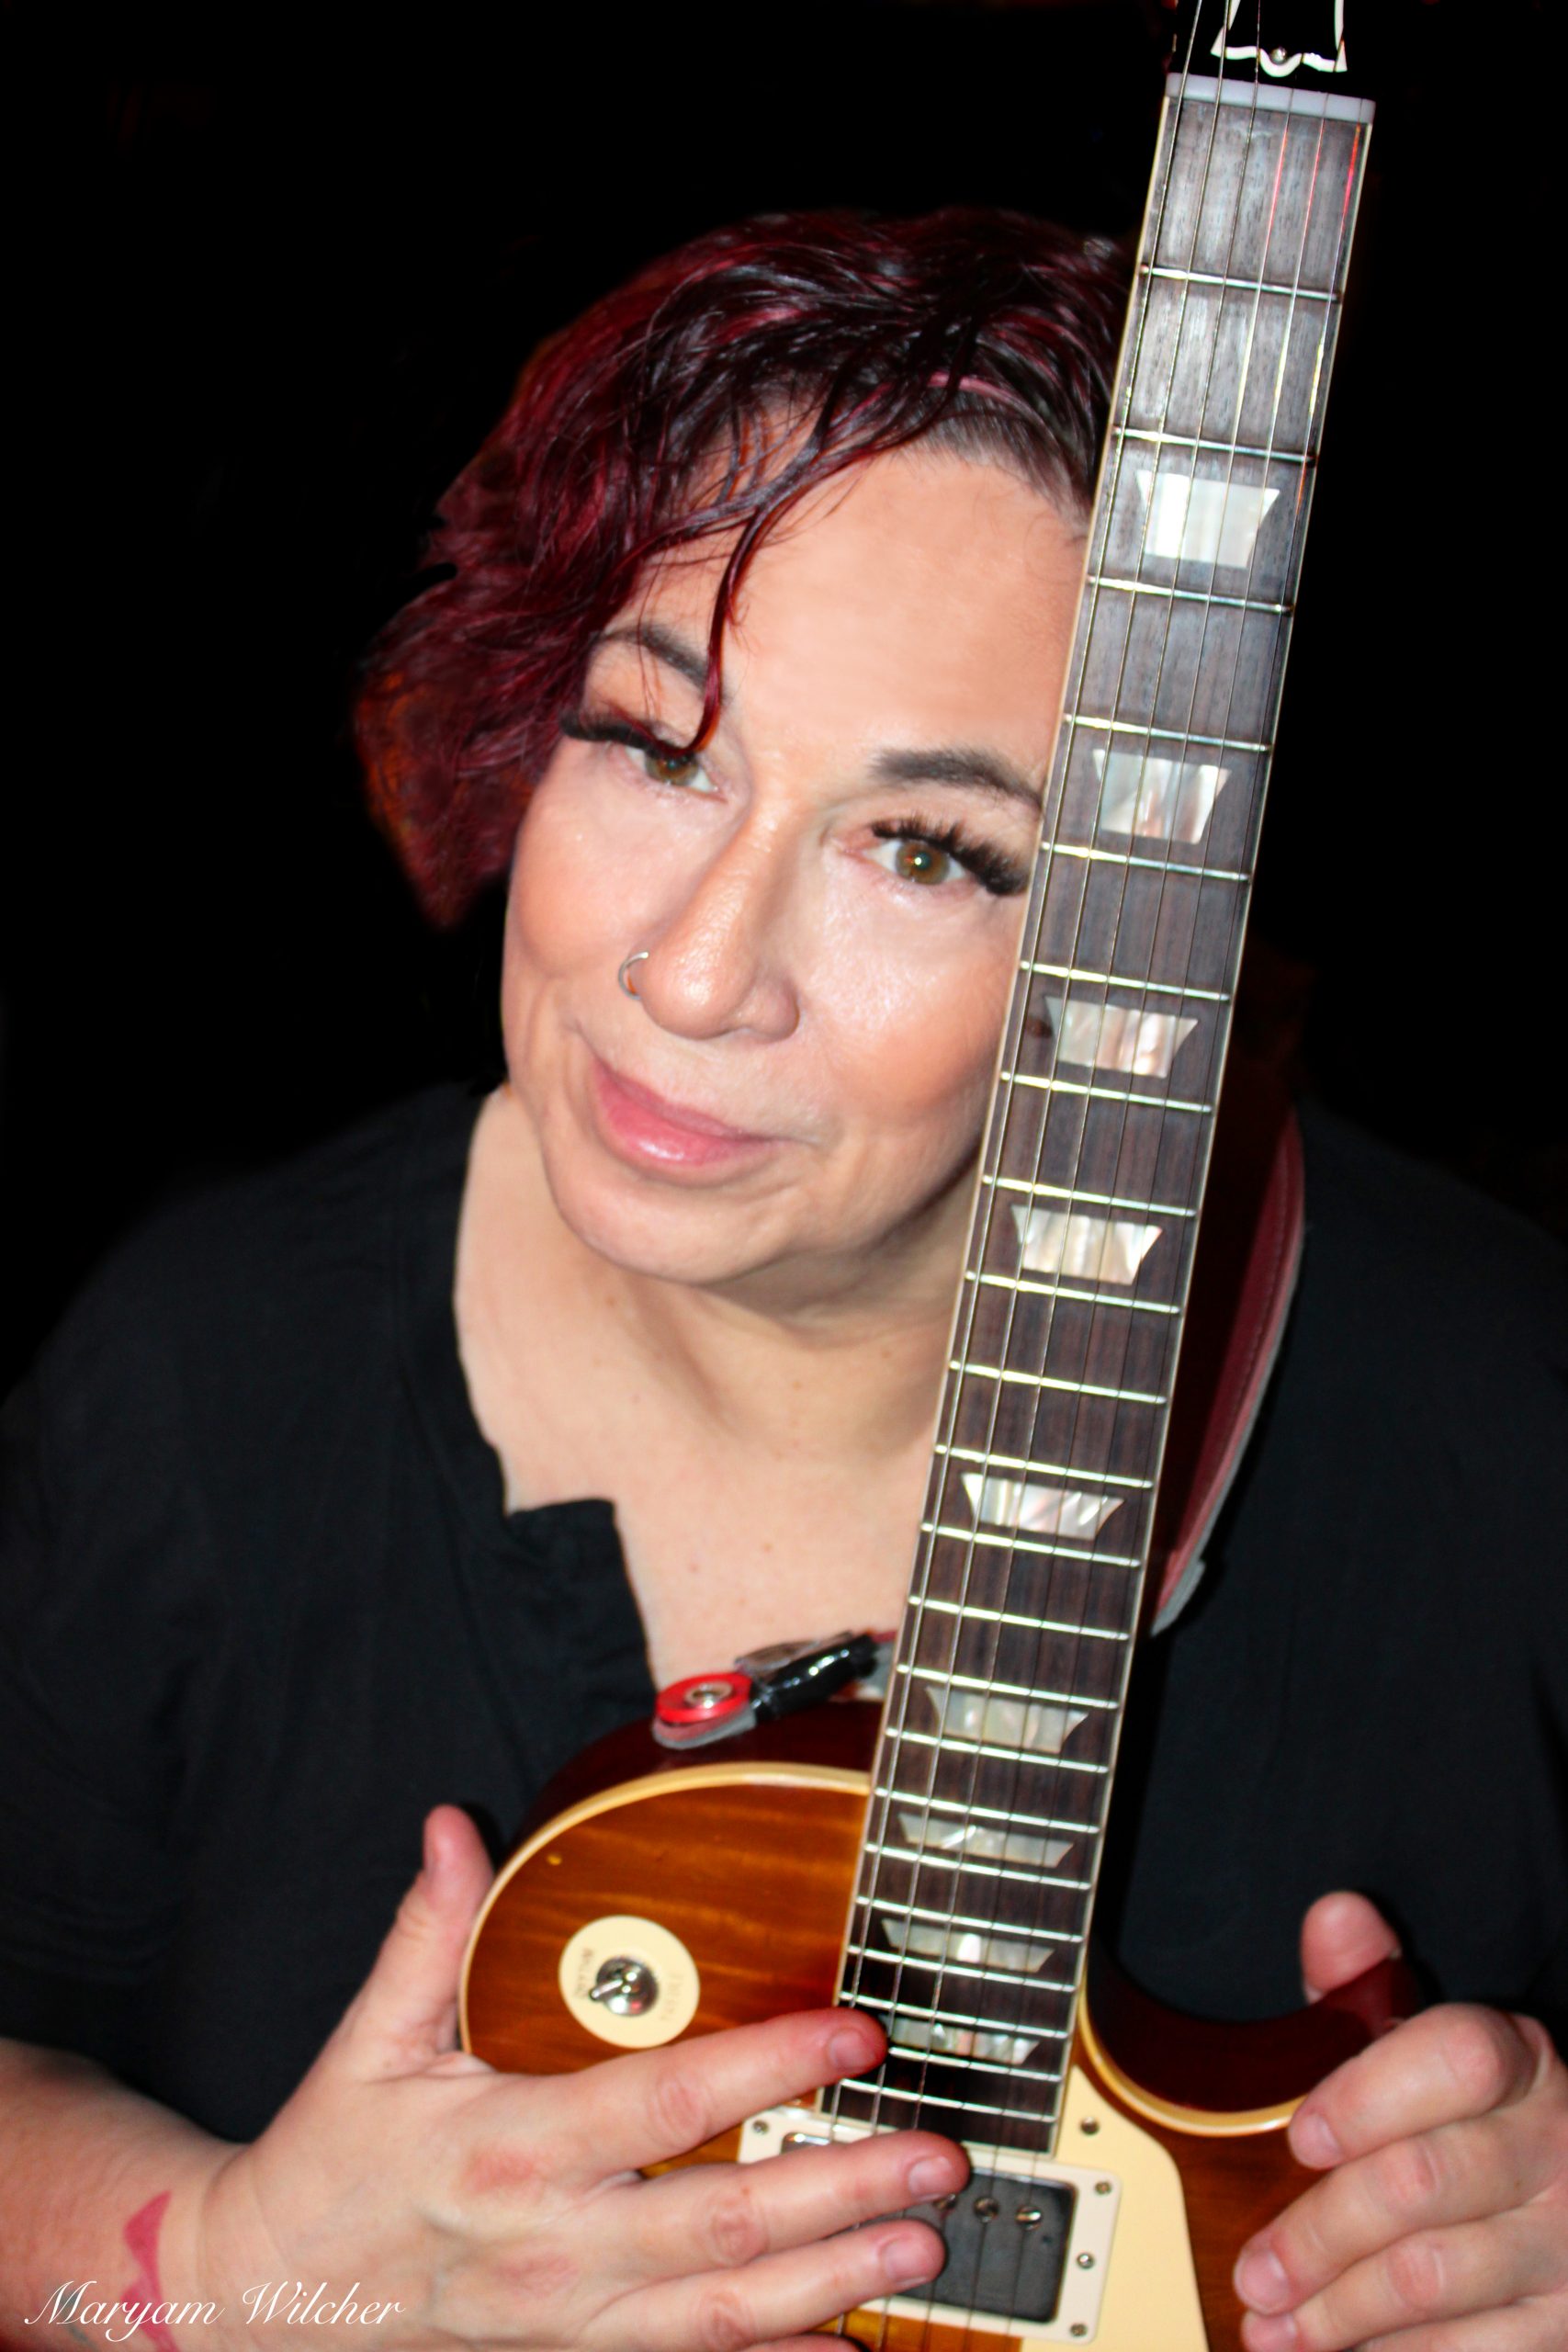 Gulf Coast Records Announces the Signing of Blues Guitar Wizard Joanna Connor and Will Release Her Label Debut CD in Spring, 2023